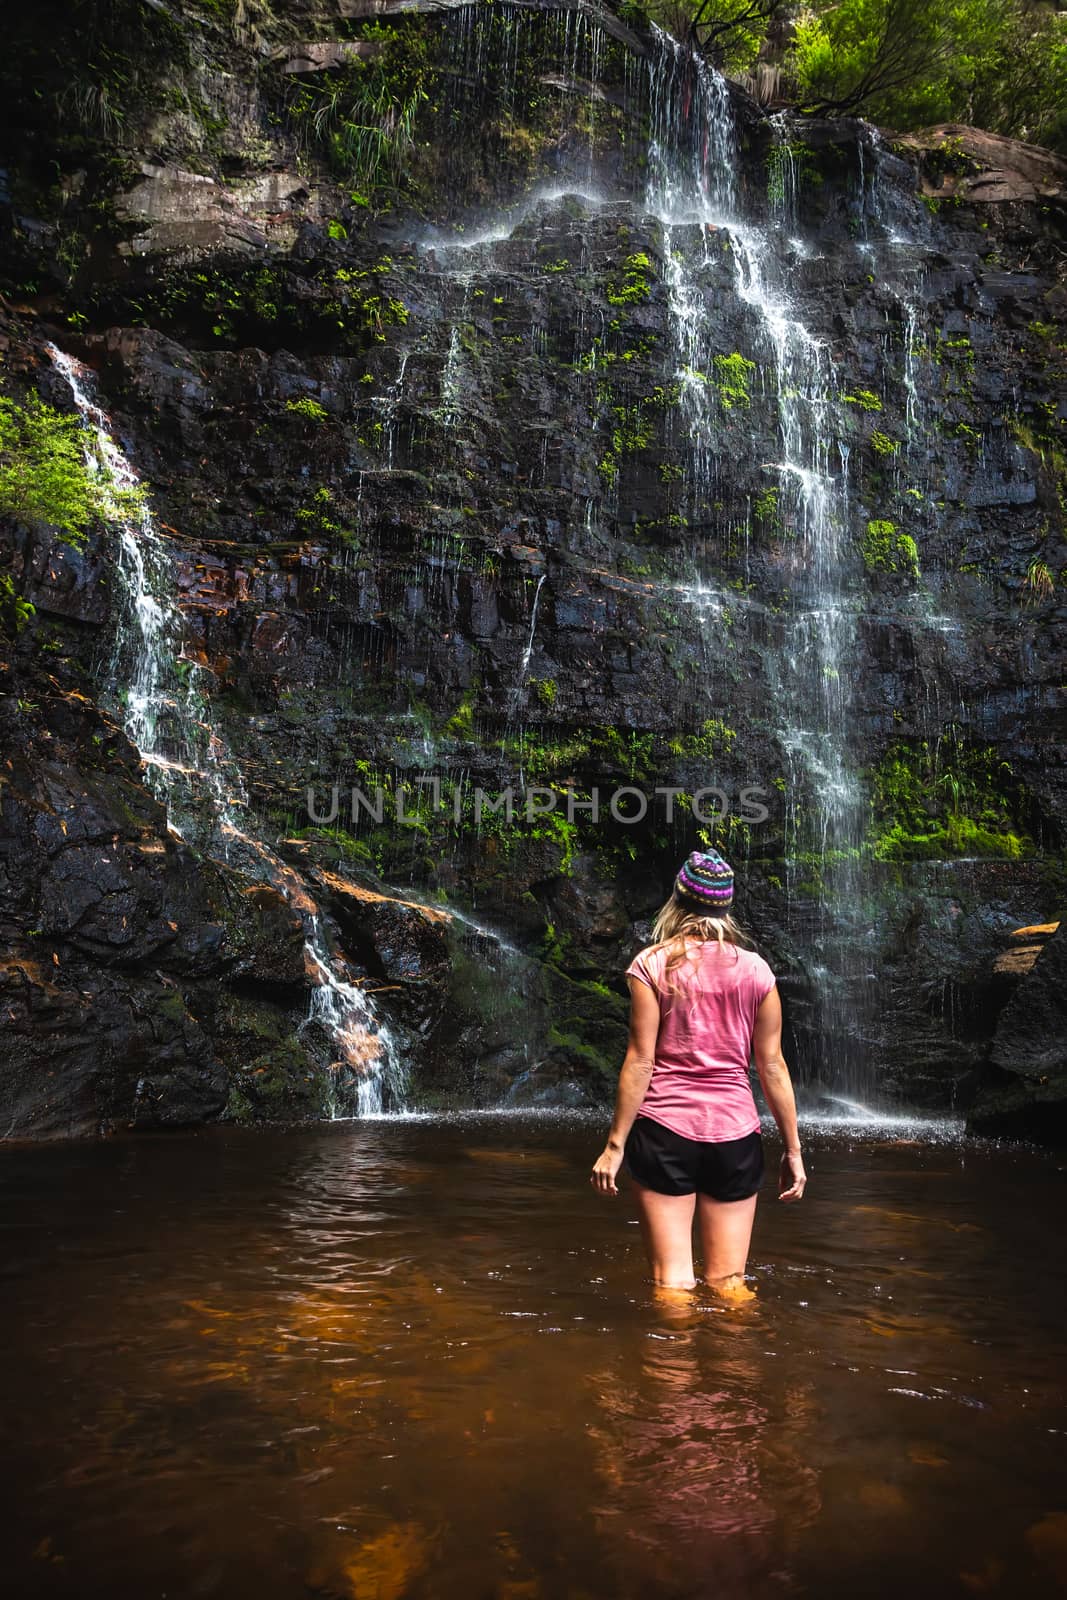 A female stands in the cooling waters of the rock pool after descending off the top of the mountain deep into the ravine  wilderness where this waterfall is located.